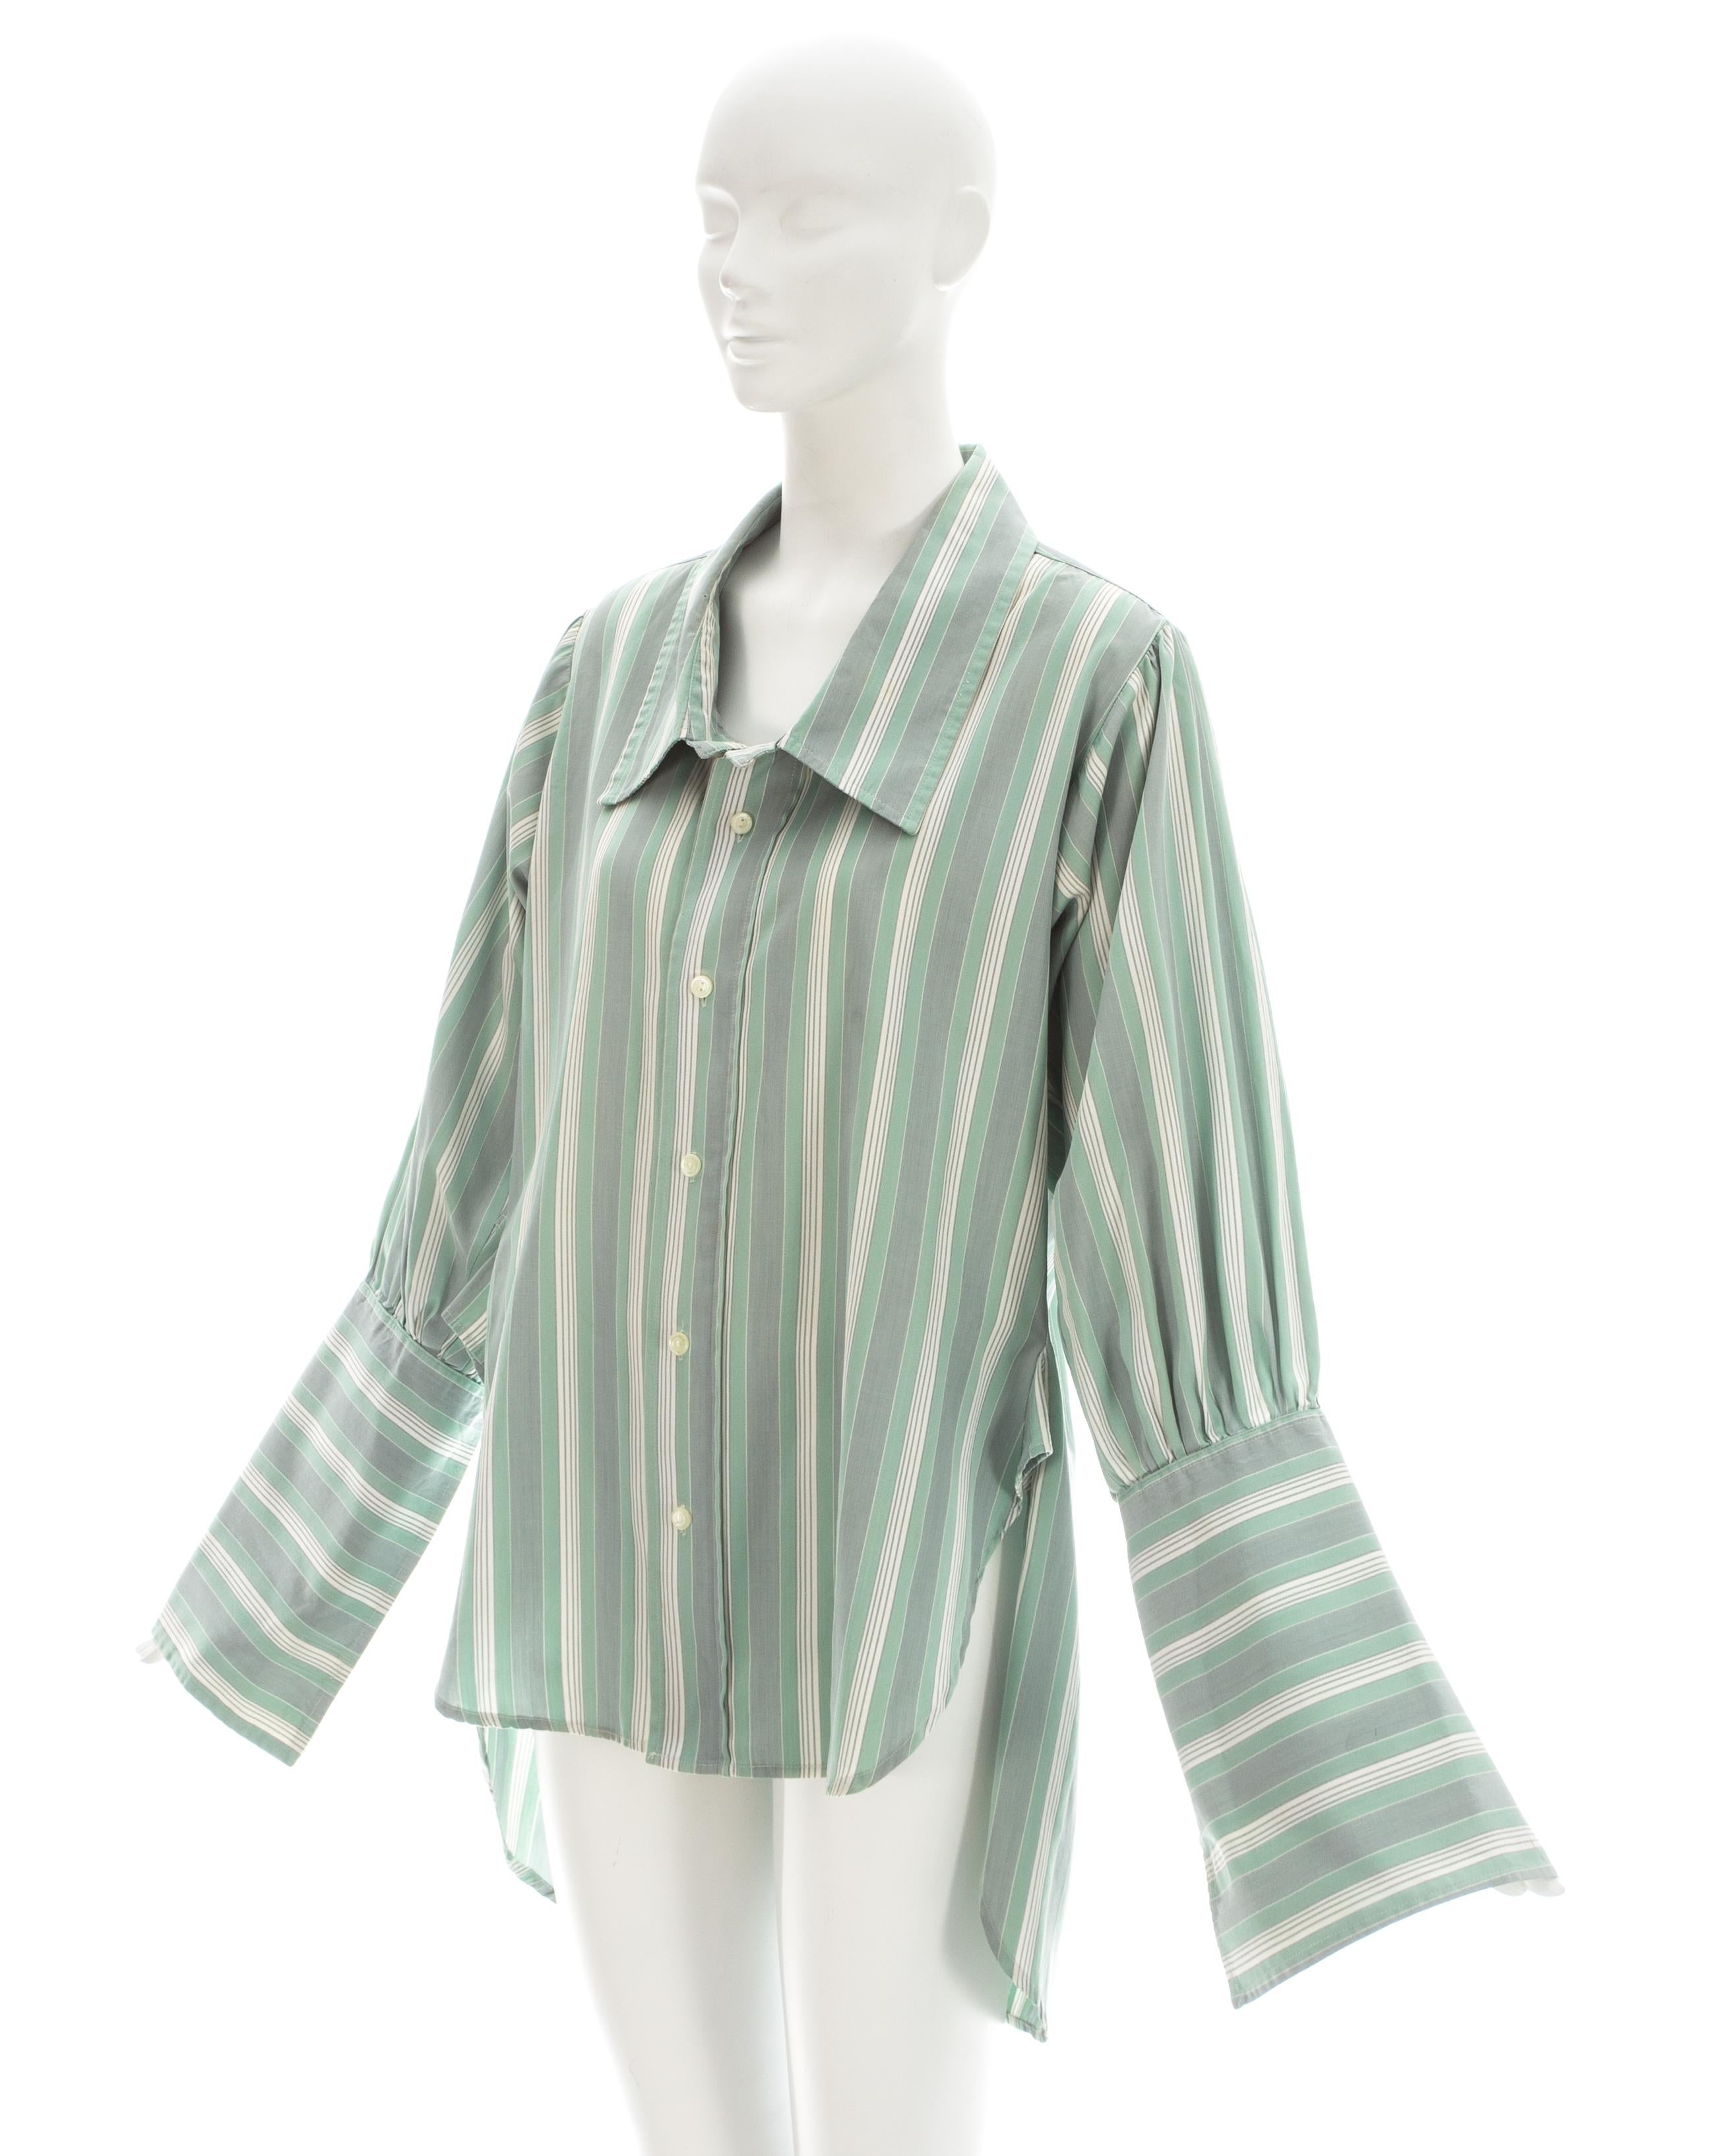 Gray Vivienne Westwood / Malcolm McLaren striped cotton oversized shirt, ss 1983 For Sale